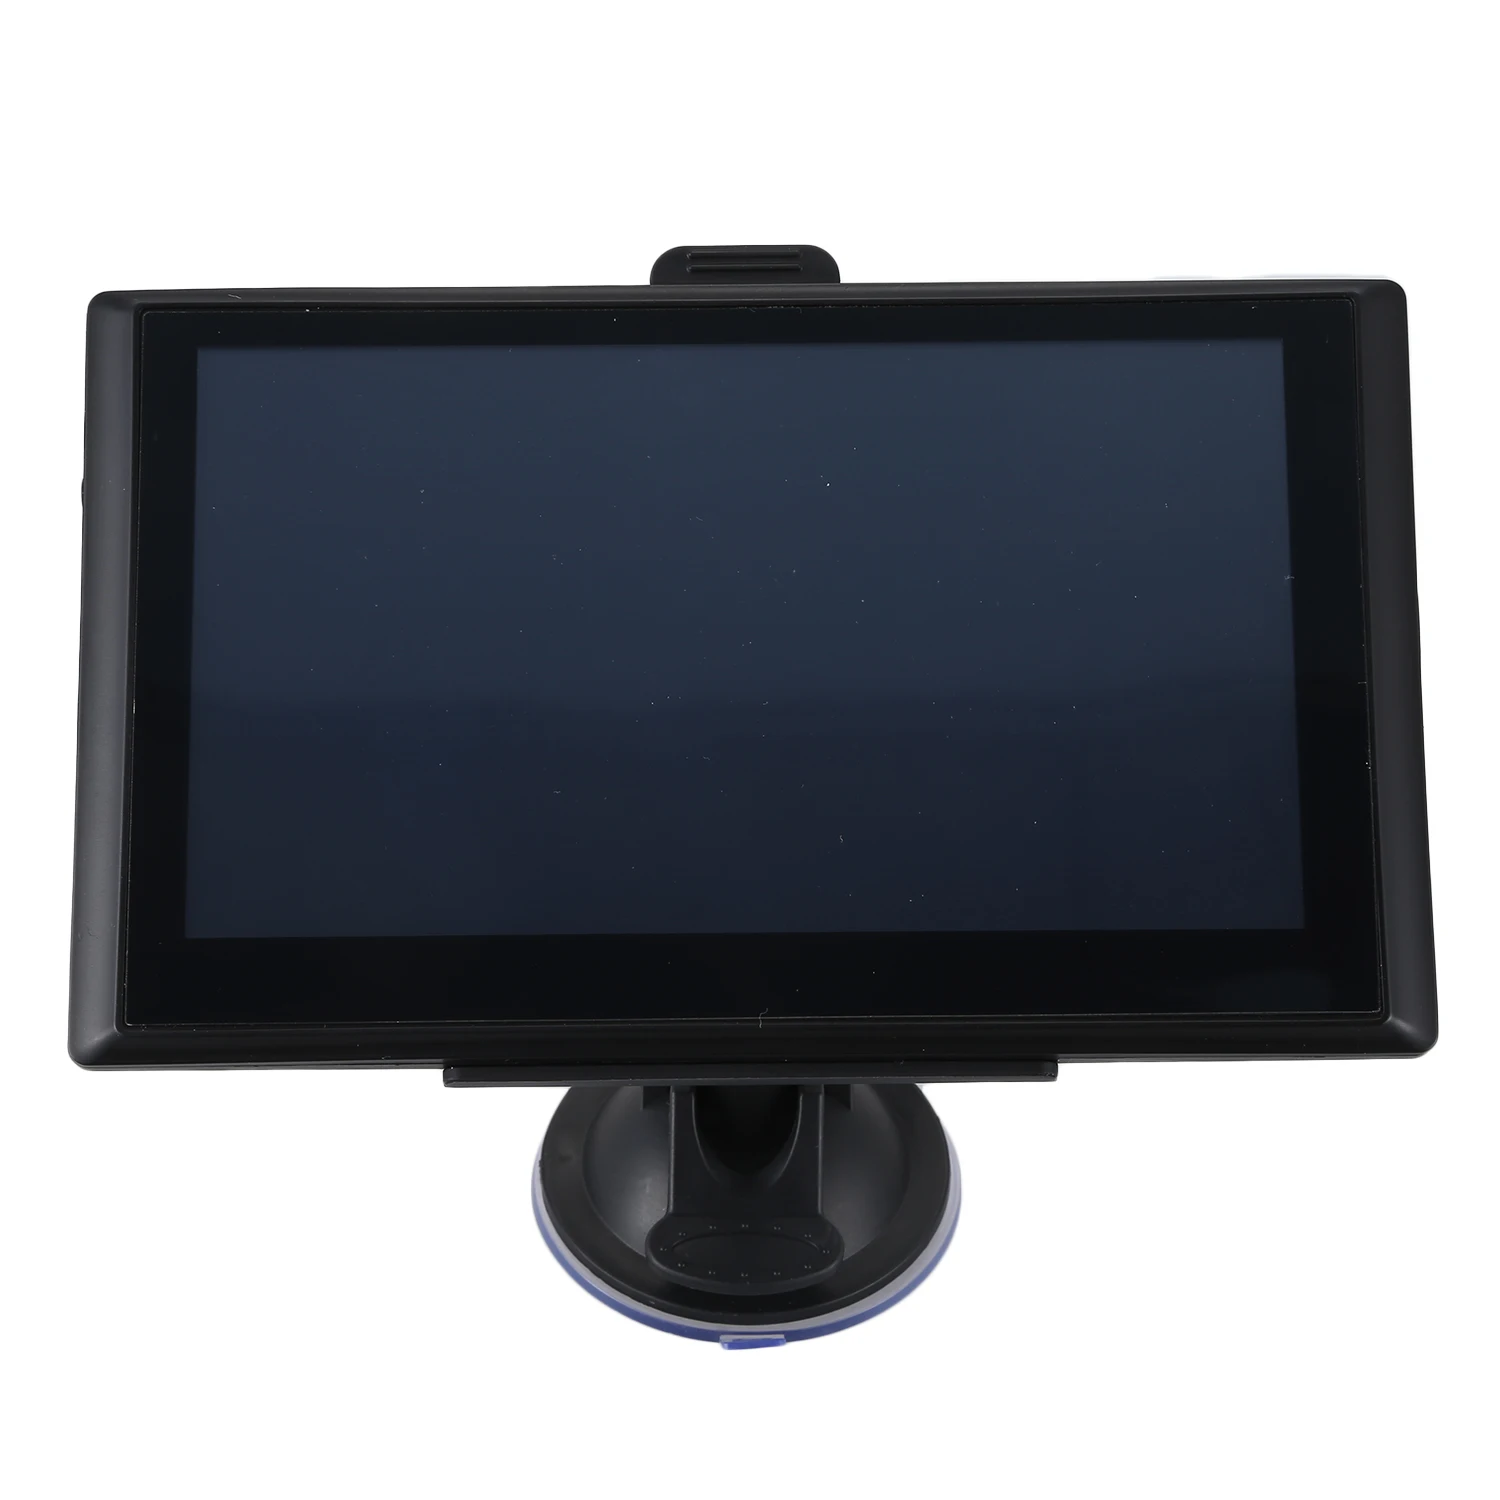 

7 Inches 8GB,800MHZ GPS Navigation with Capacitive Touchscreen Preloaded UK & EU Maps 720